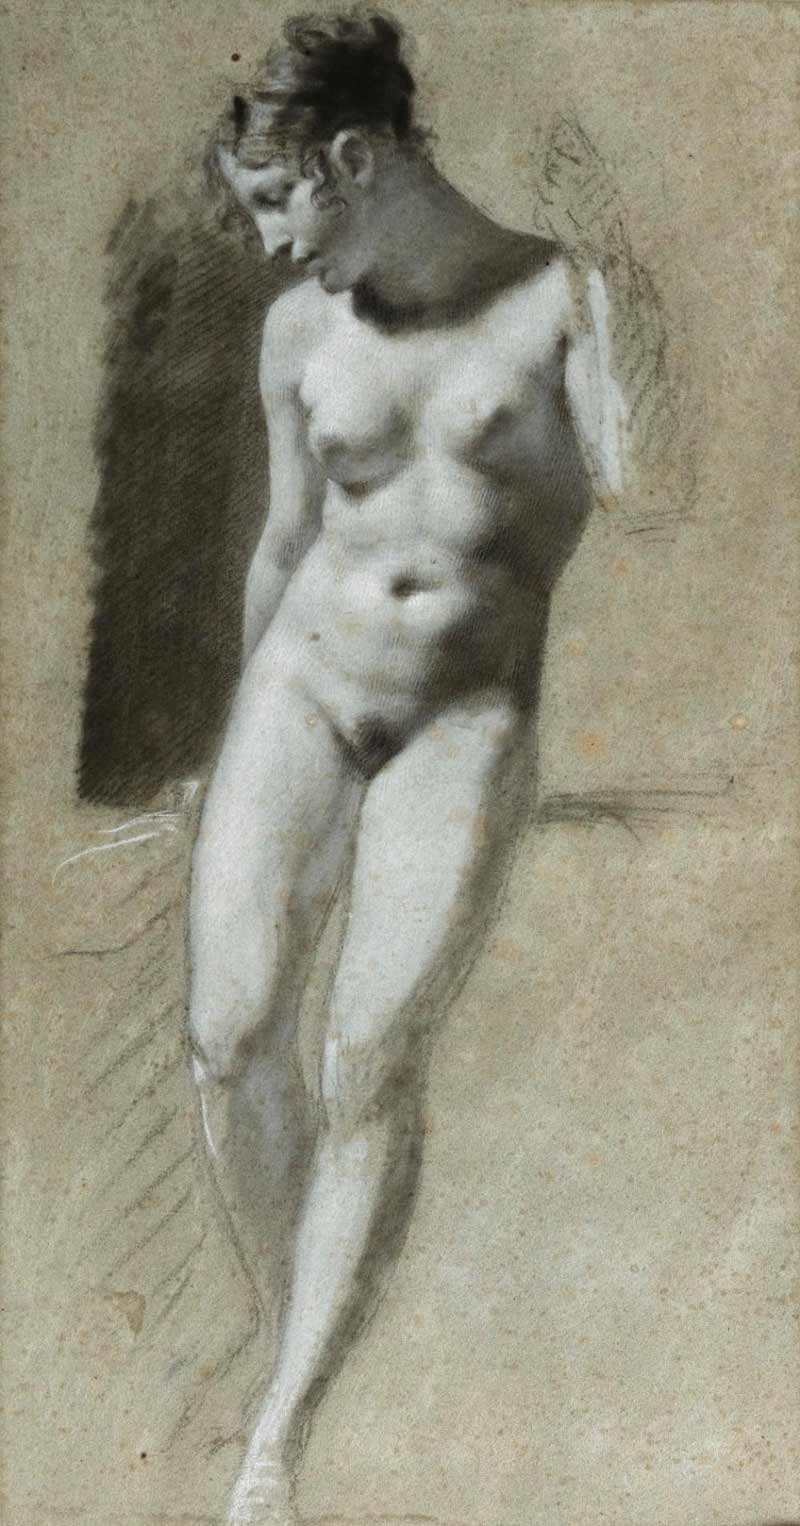 Pierre-Paul Prud'hon - French Romantic painter and draughtsman. 1758 - 1823